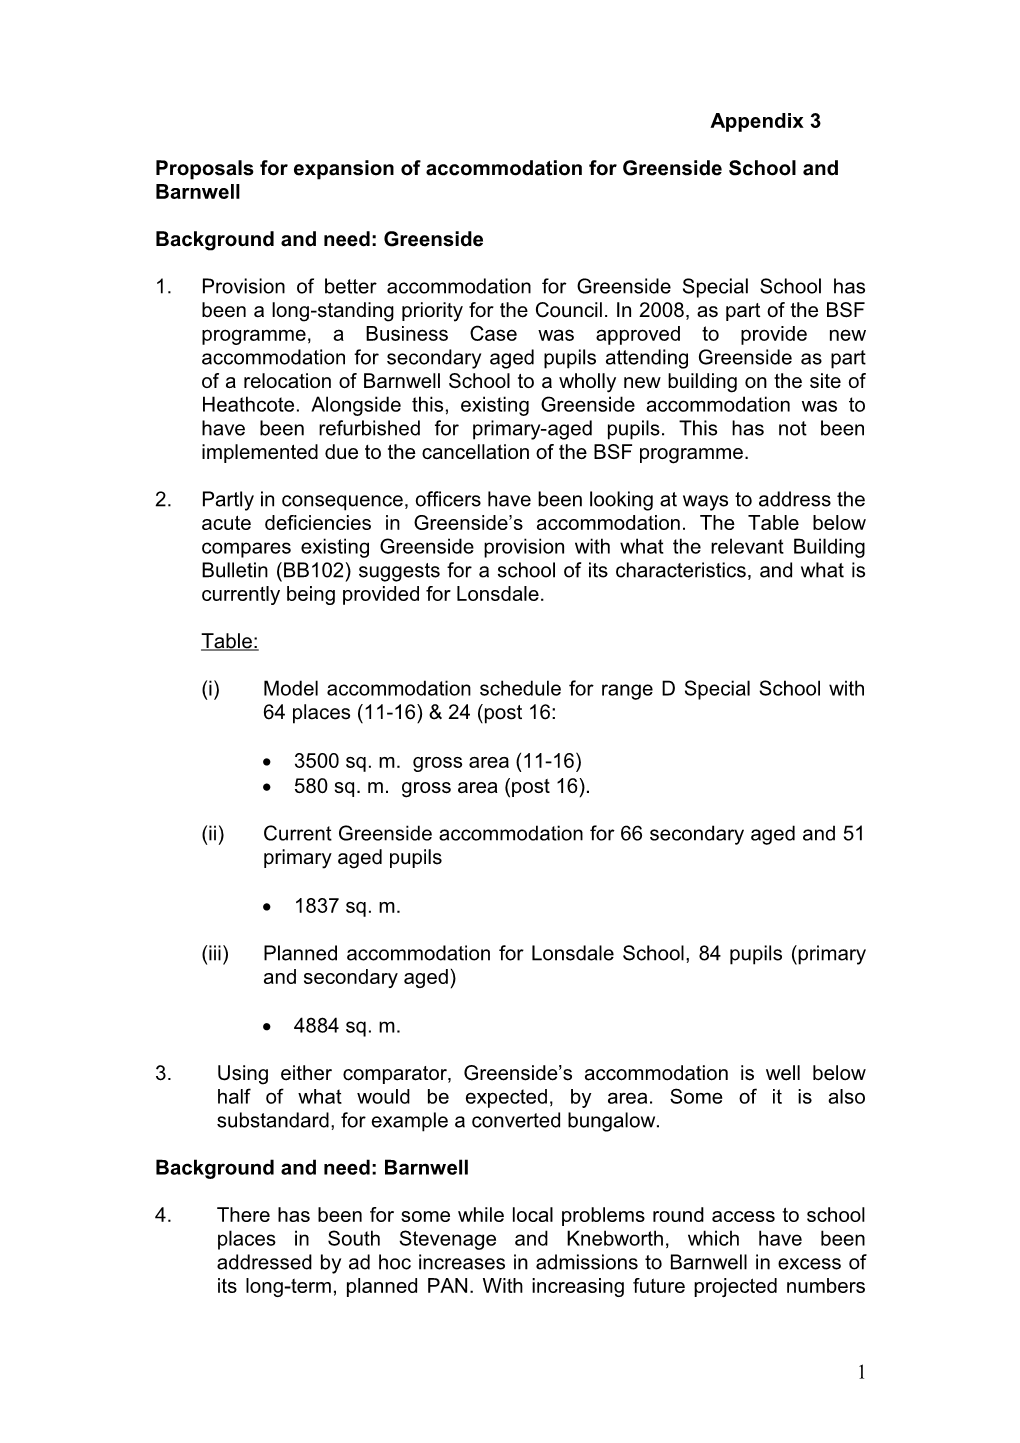 Proposals for Expansion of Accommodation for Greensideschool and Barnwell